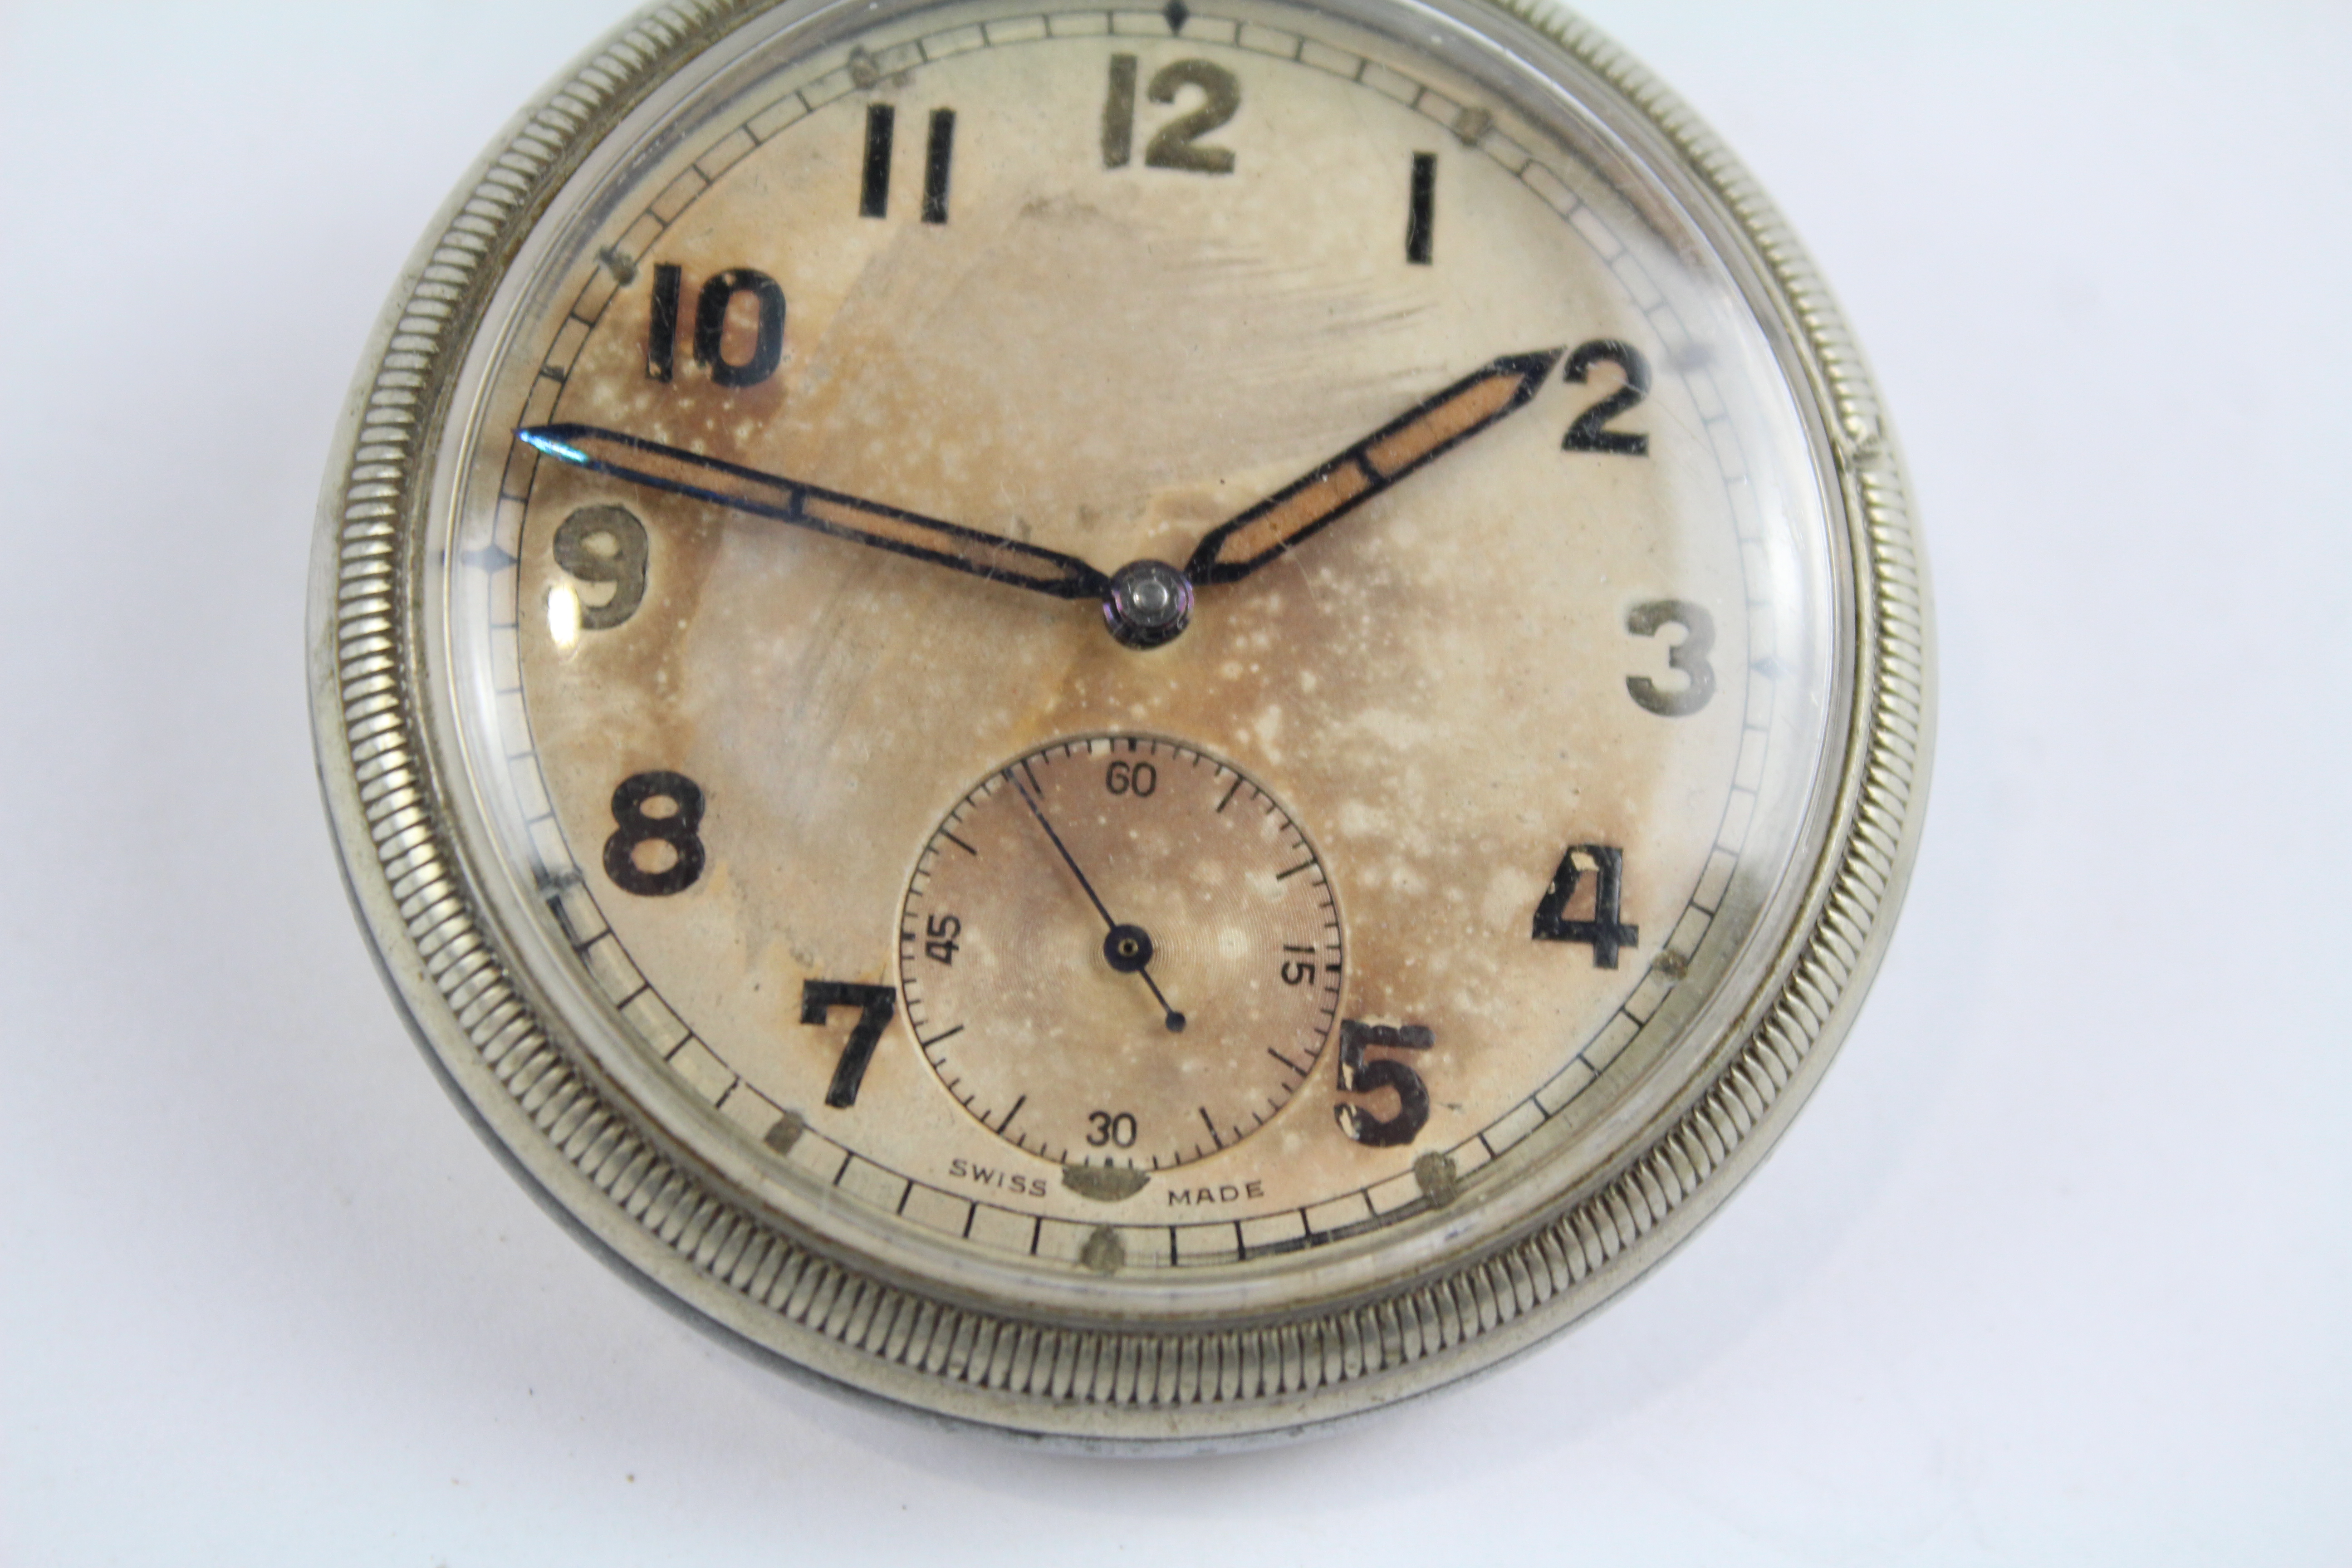 GS/TP Military Issued Gents WWII Era POCKET WATCH Hand-wind WORKING 404869 - Image 3 of 6